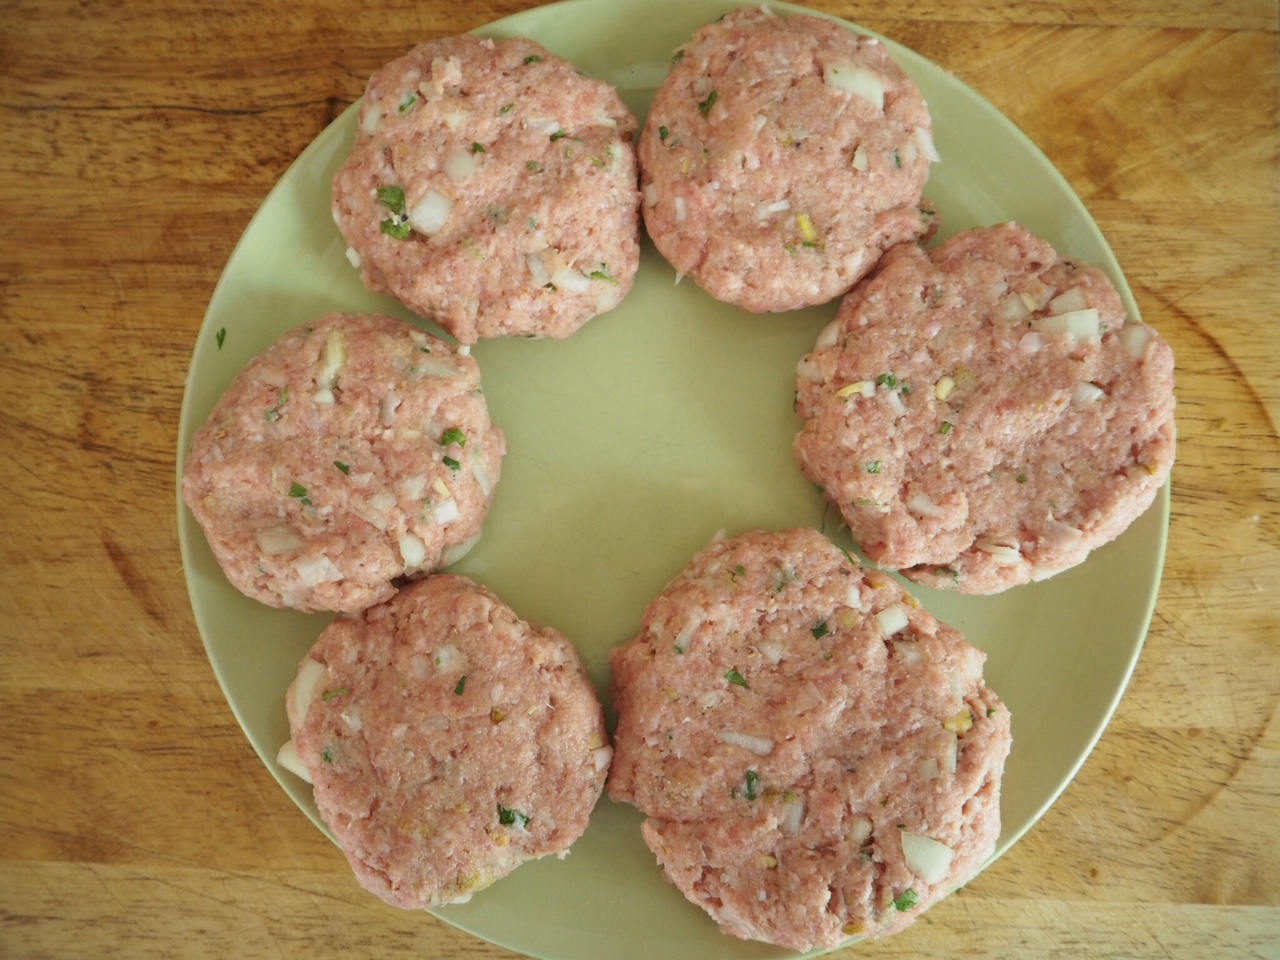 Pork and Pear Patties